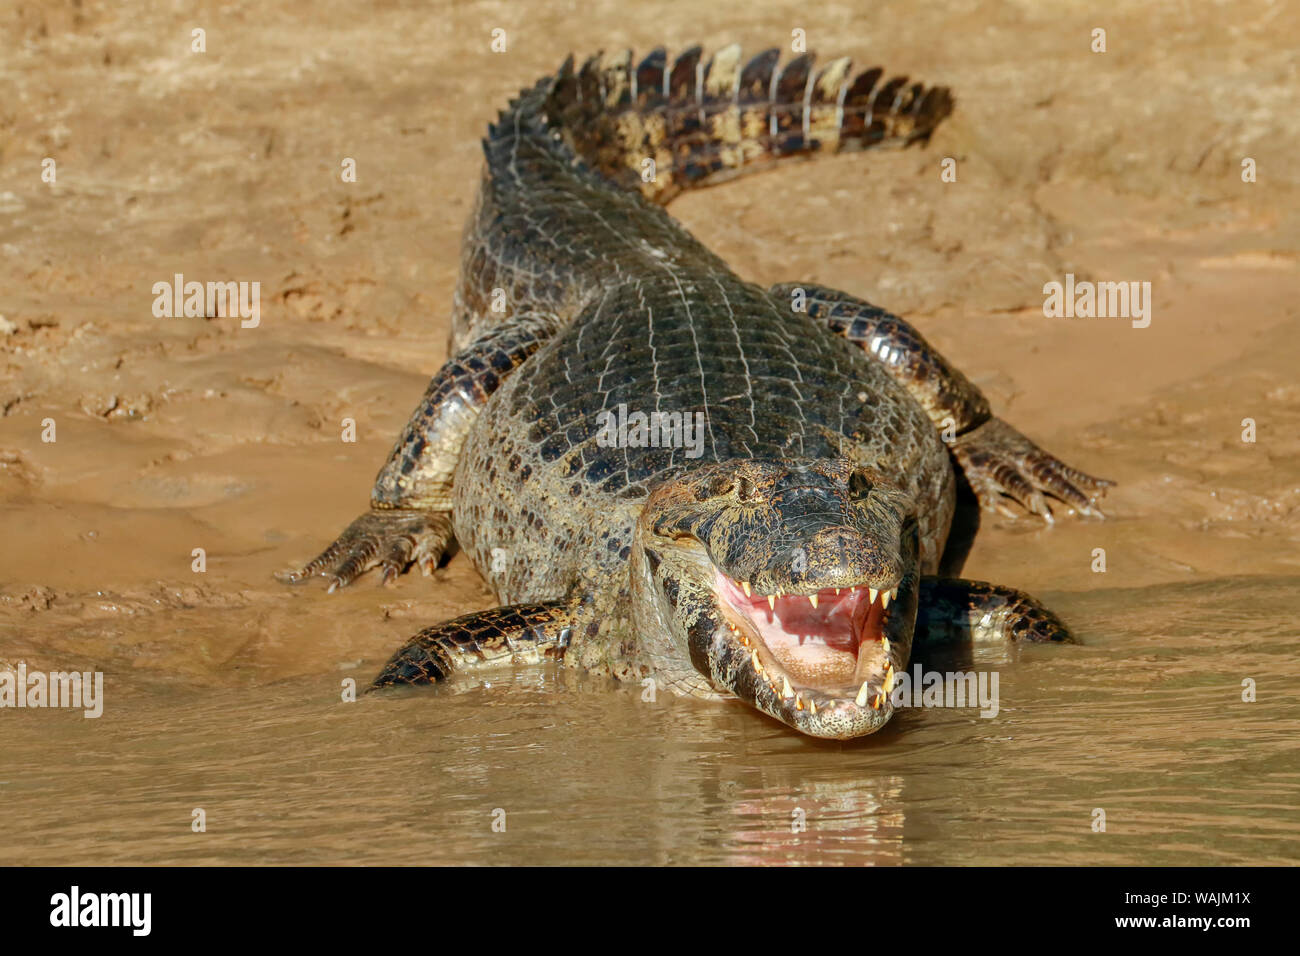 Pantanal, Mato Grosso, Brazil. Yacare Caiman with an open mouth sunning itself in the Cuiaba River. Stock Photo